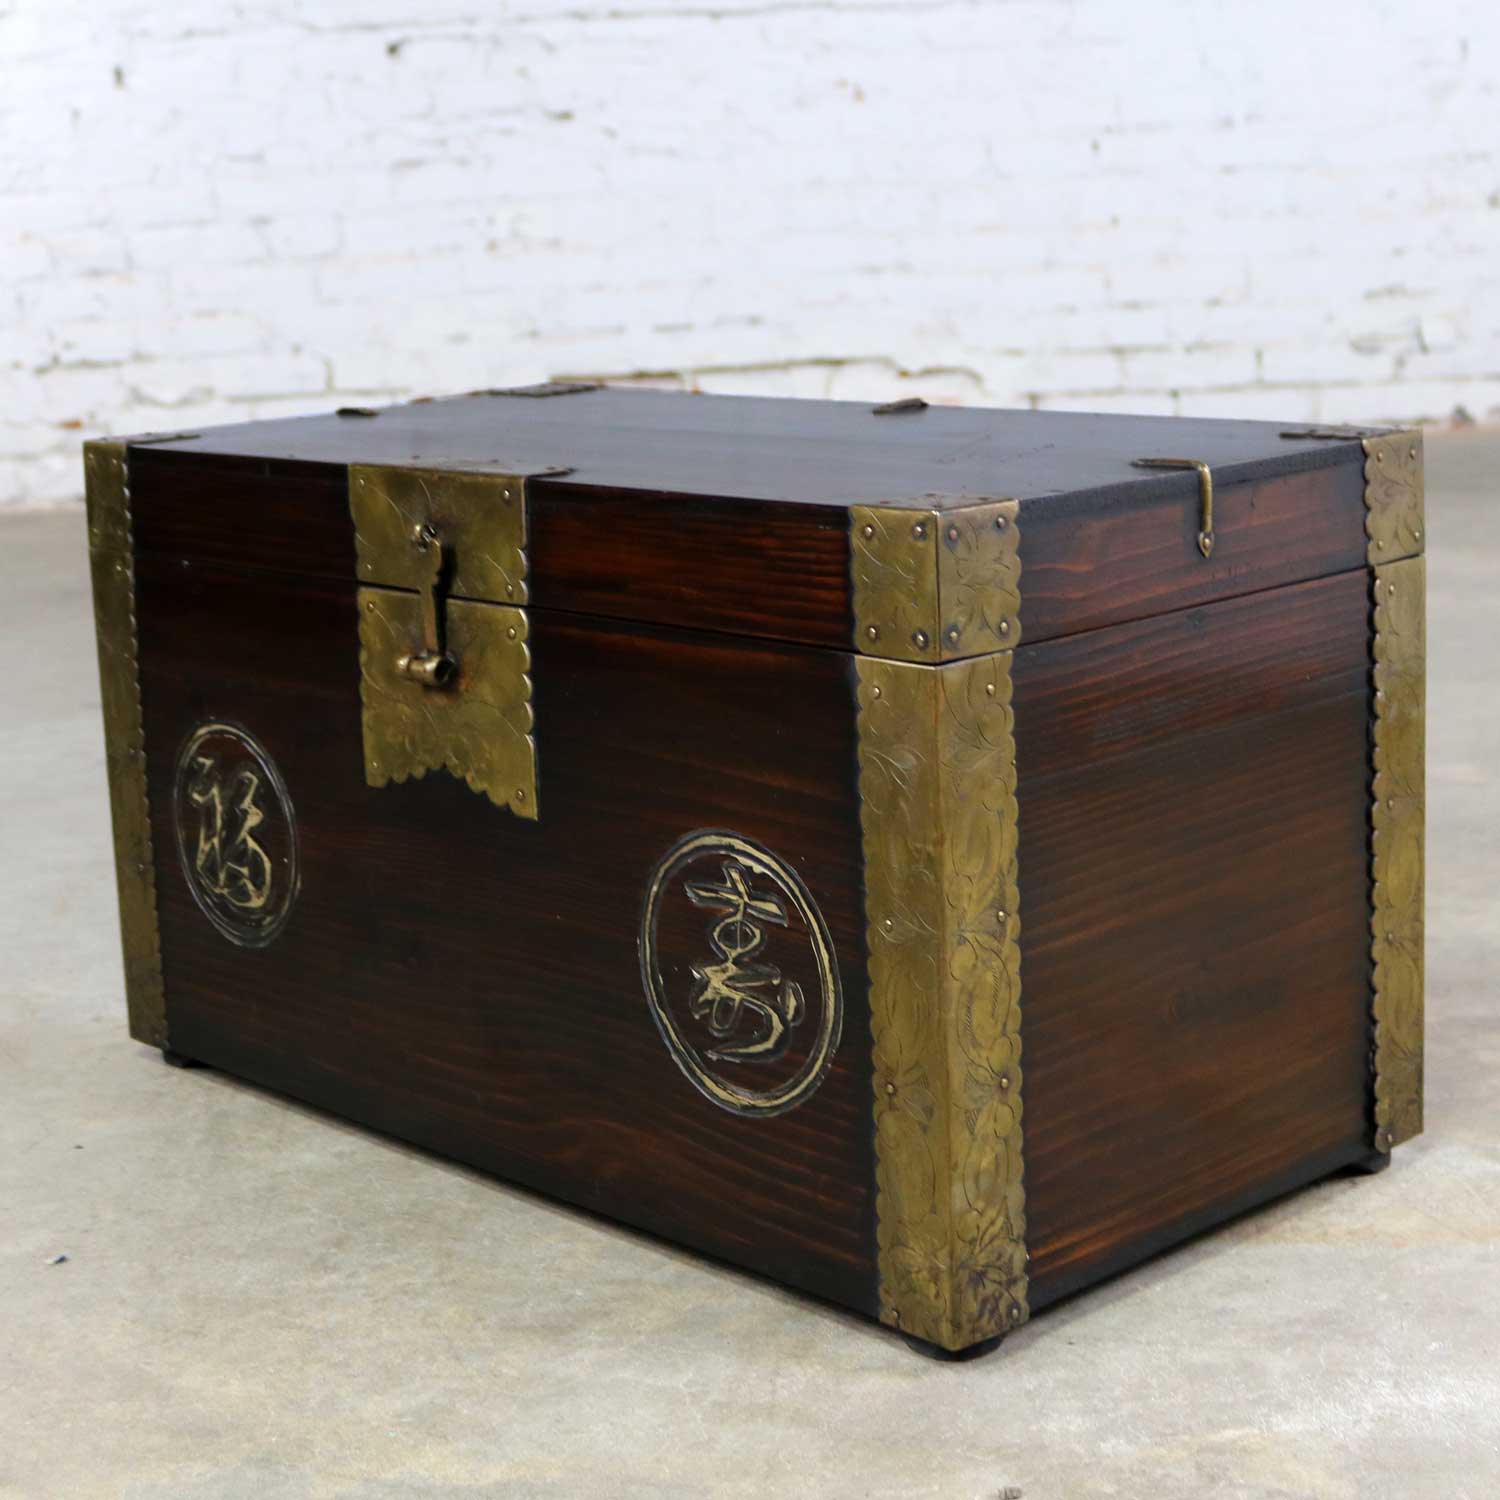 Antique Korean Trunk Chest or Box Circa 1920s with Luck and Longevity Characters